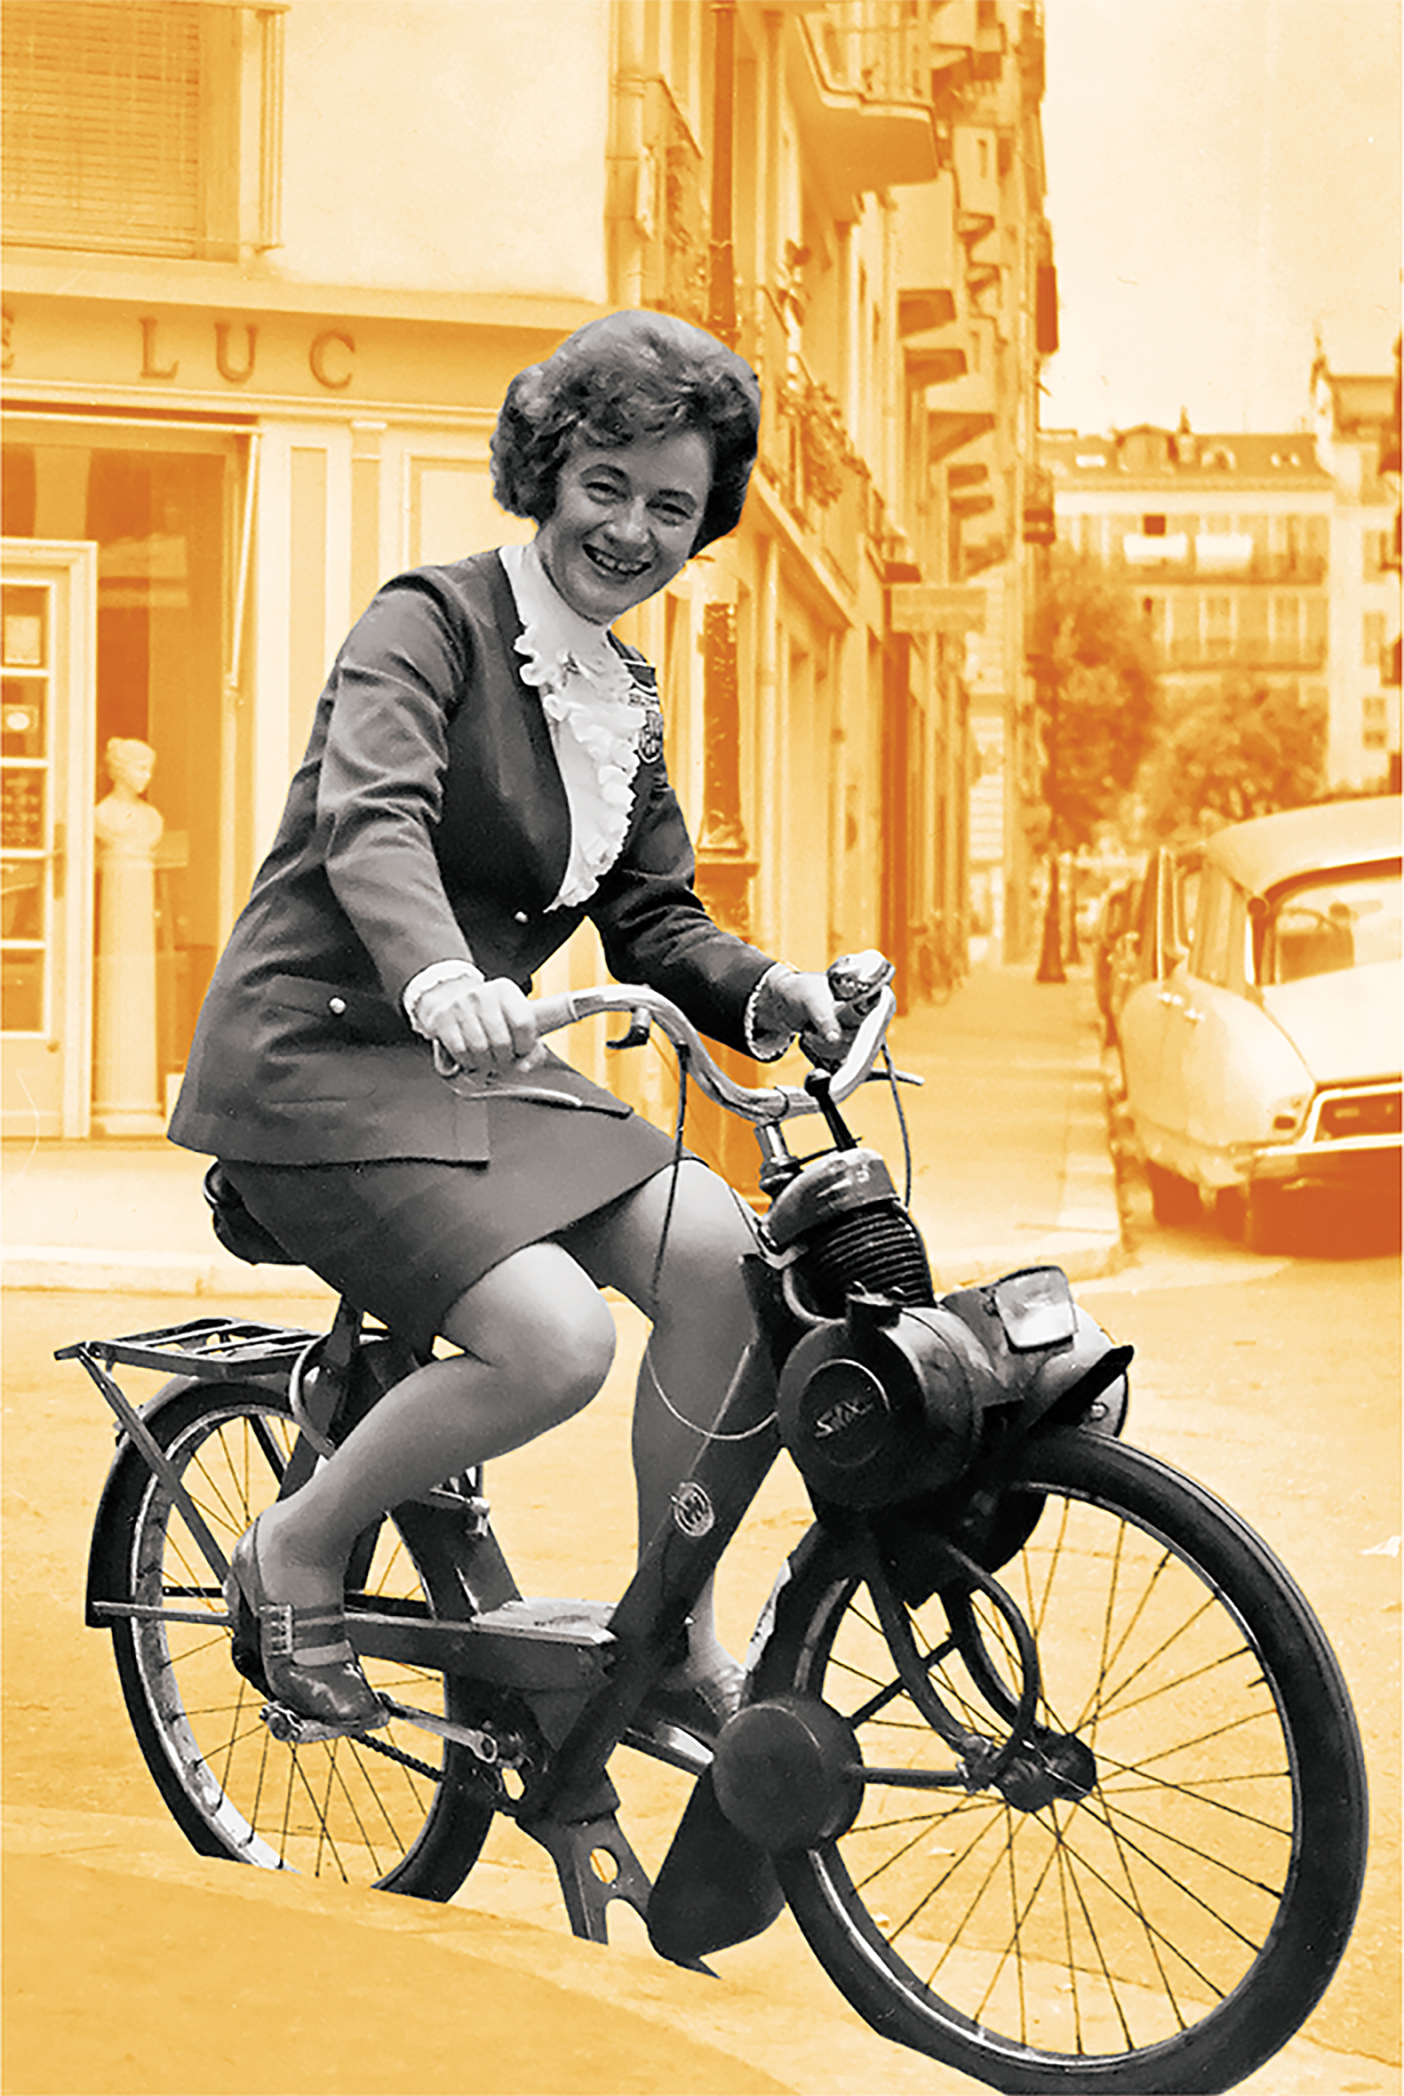 Mary Bee Jensen smiling while riding a bike down the street